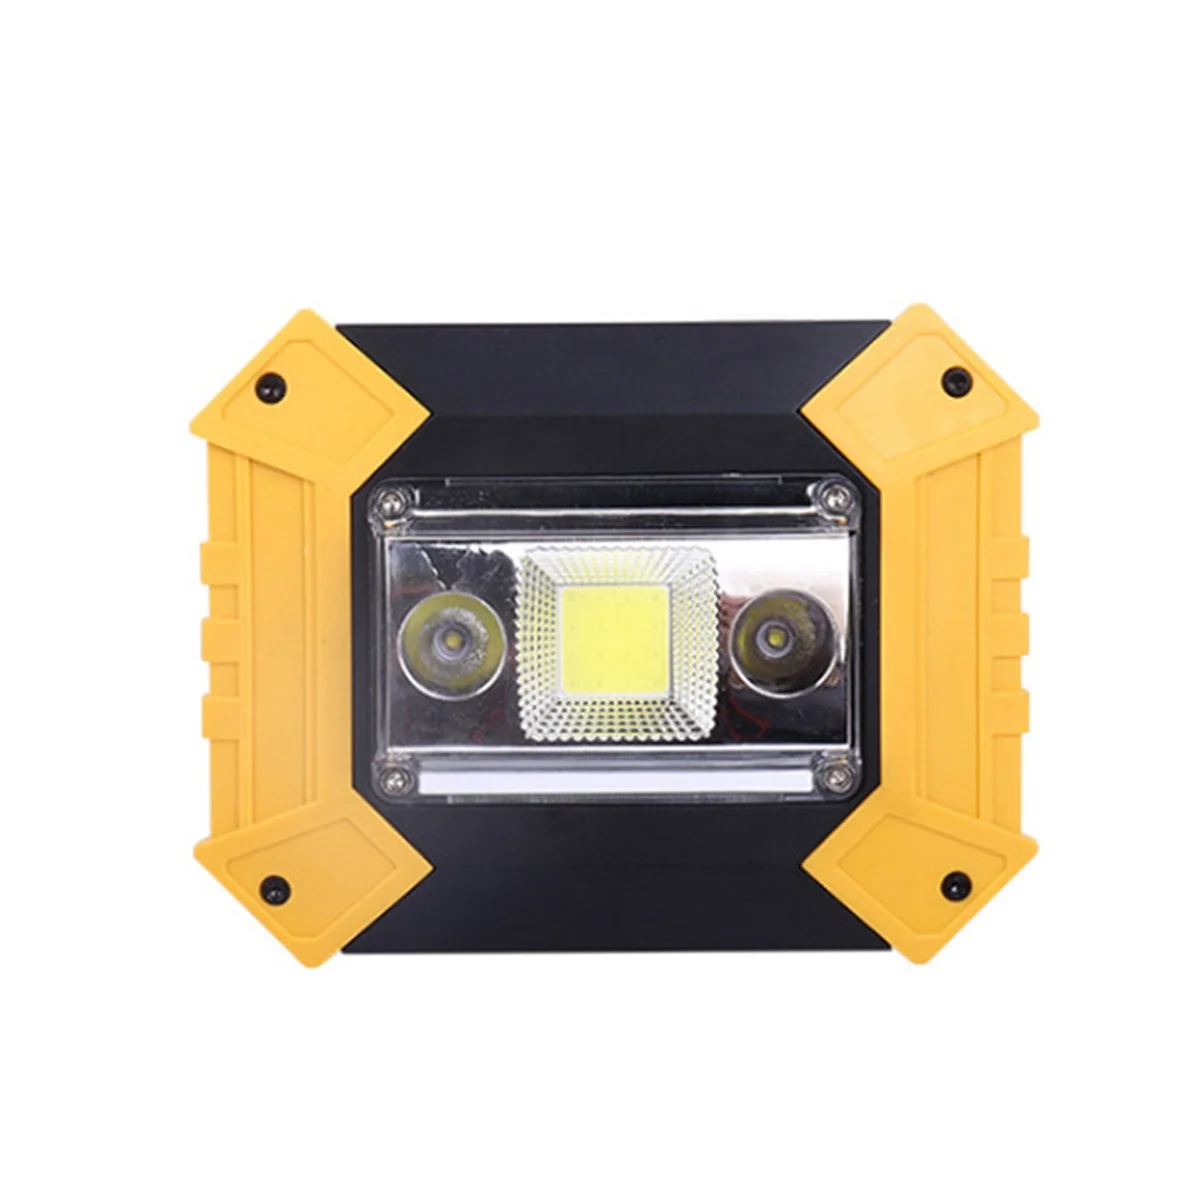 

LED Camping Light Cob Floodlight USB Rechargeable Strong Light Portable Light Emergency Working Light